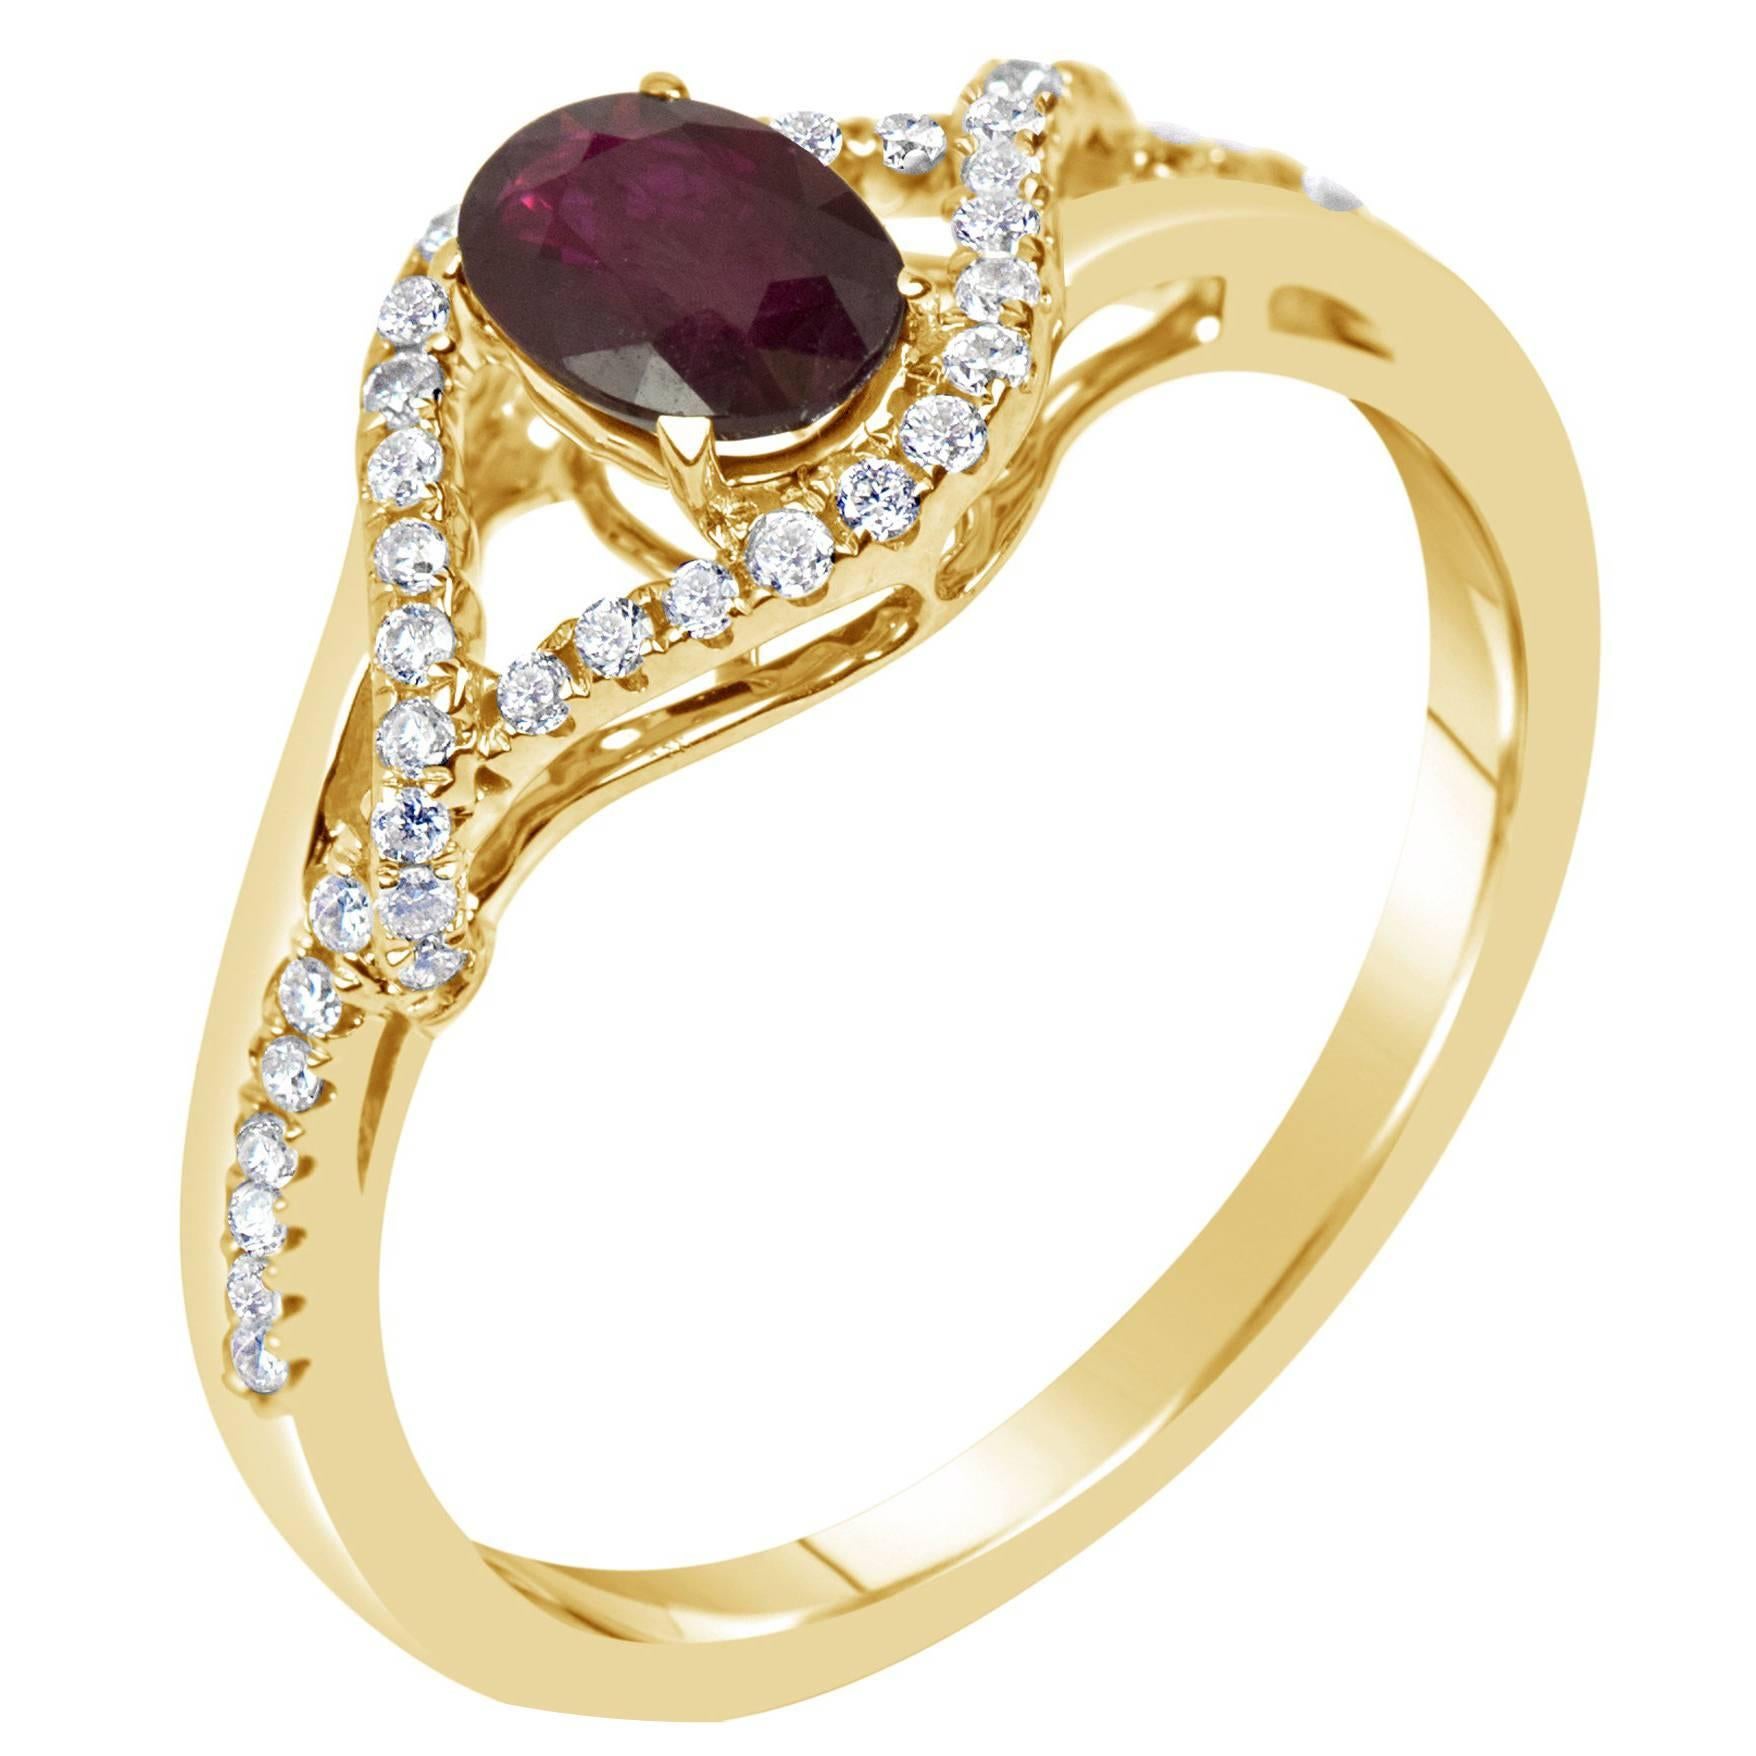 .55 Carat Oval Ruby Diamond Gold Engagement Ring